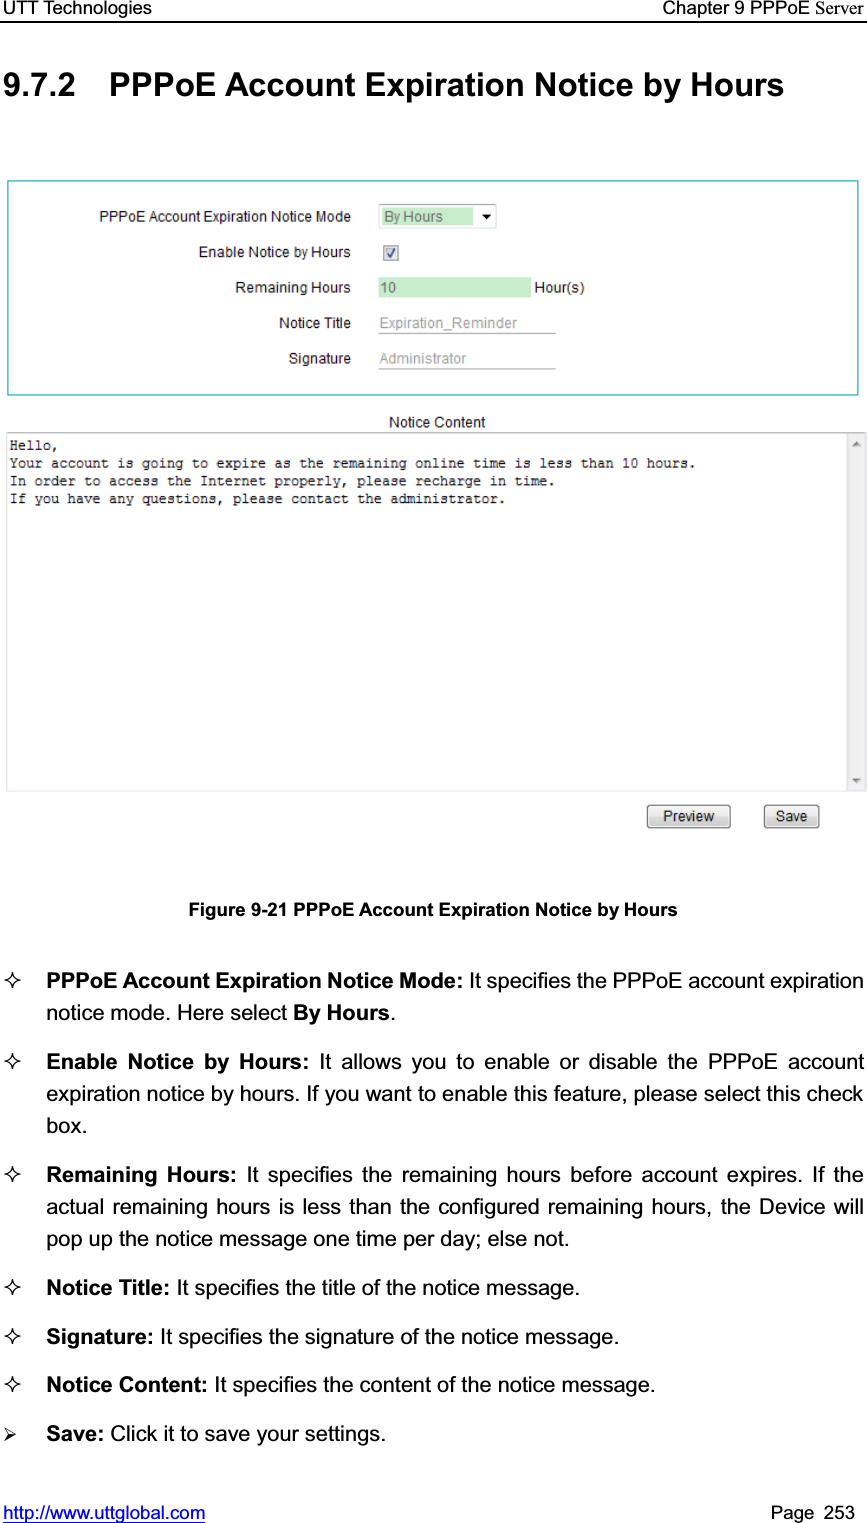 UTT Technologies    Chapter 9 PPPoE Serverhttp://www.uttglobal.com Page 253 9.7.2 PPPoE Account Expiration Notice by Hours Figure 9-21 PPPoE Account Expiration Notice by Hours PPPoE Account Expiration Notice Mode: It specifies the PPPoE account expiration notice mode. Here select By Hours.Enable Notice by Hours: It allows you to enable or disable the PPPoE account expiration notice by hours. If you want to enable this feature, please select this check box. Remaining Hours: It specifies the remaining hours before account expires. If the actual remaining hours is less than the configured remaining hours, the Device will pop up the notice message one time per day; else not.Notice Title: It specifies the title of the notice message. Signature: It specifies the signature of the notice message. Notice Content: It specifies the content of the notice message. ¾Save: Click it to save your settings.